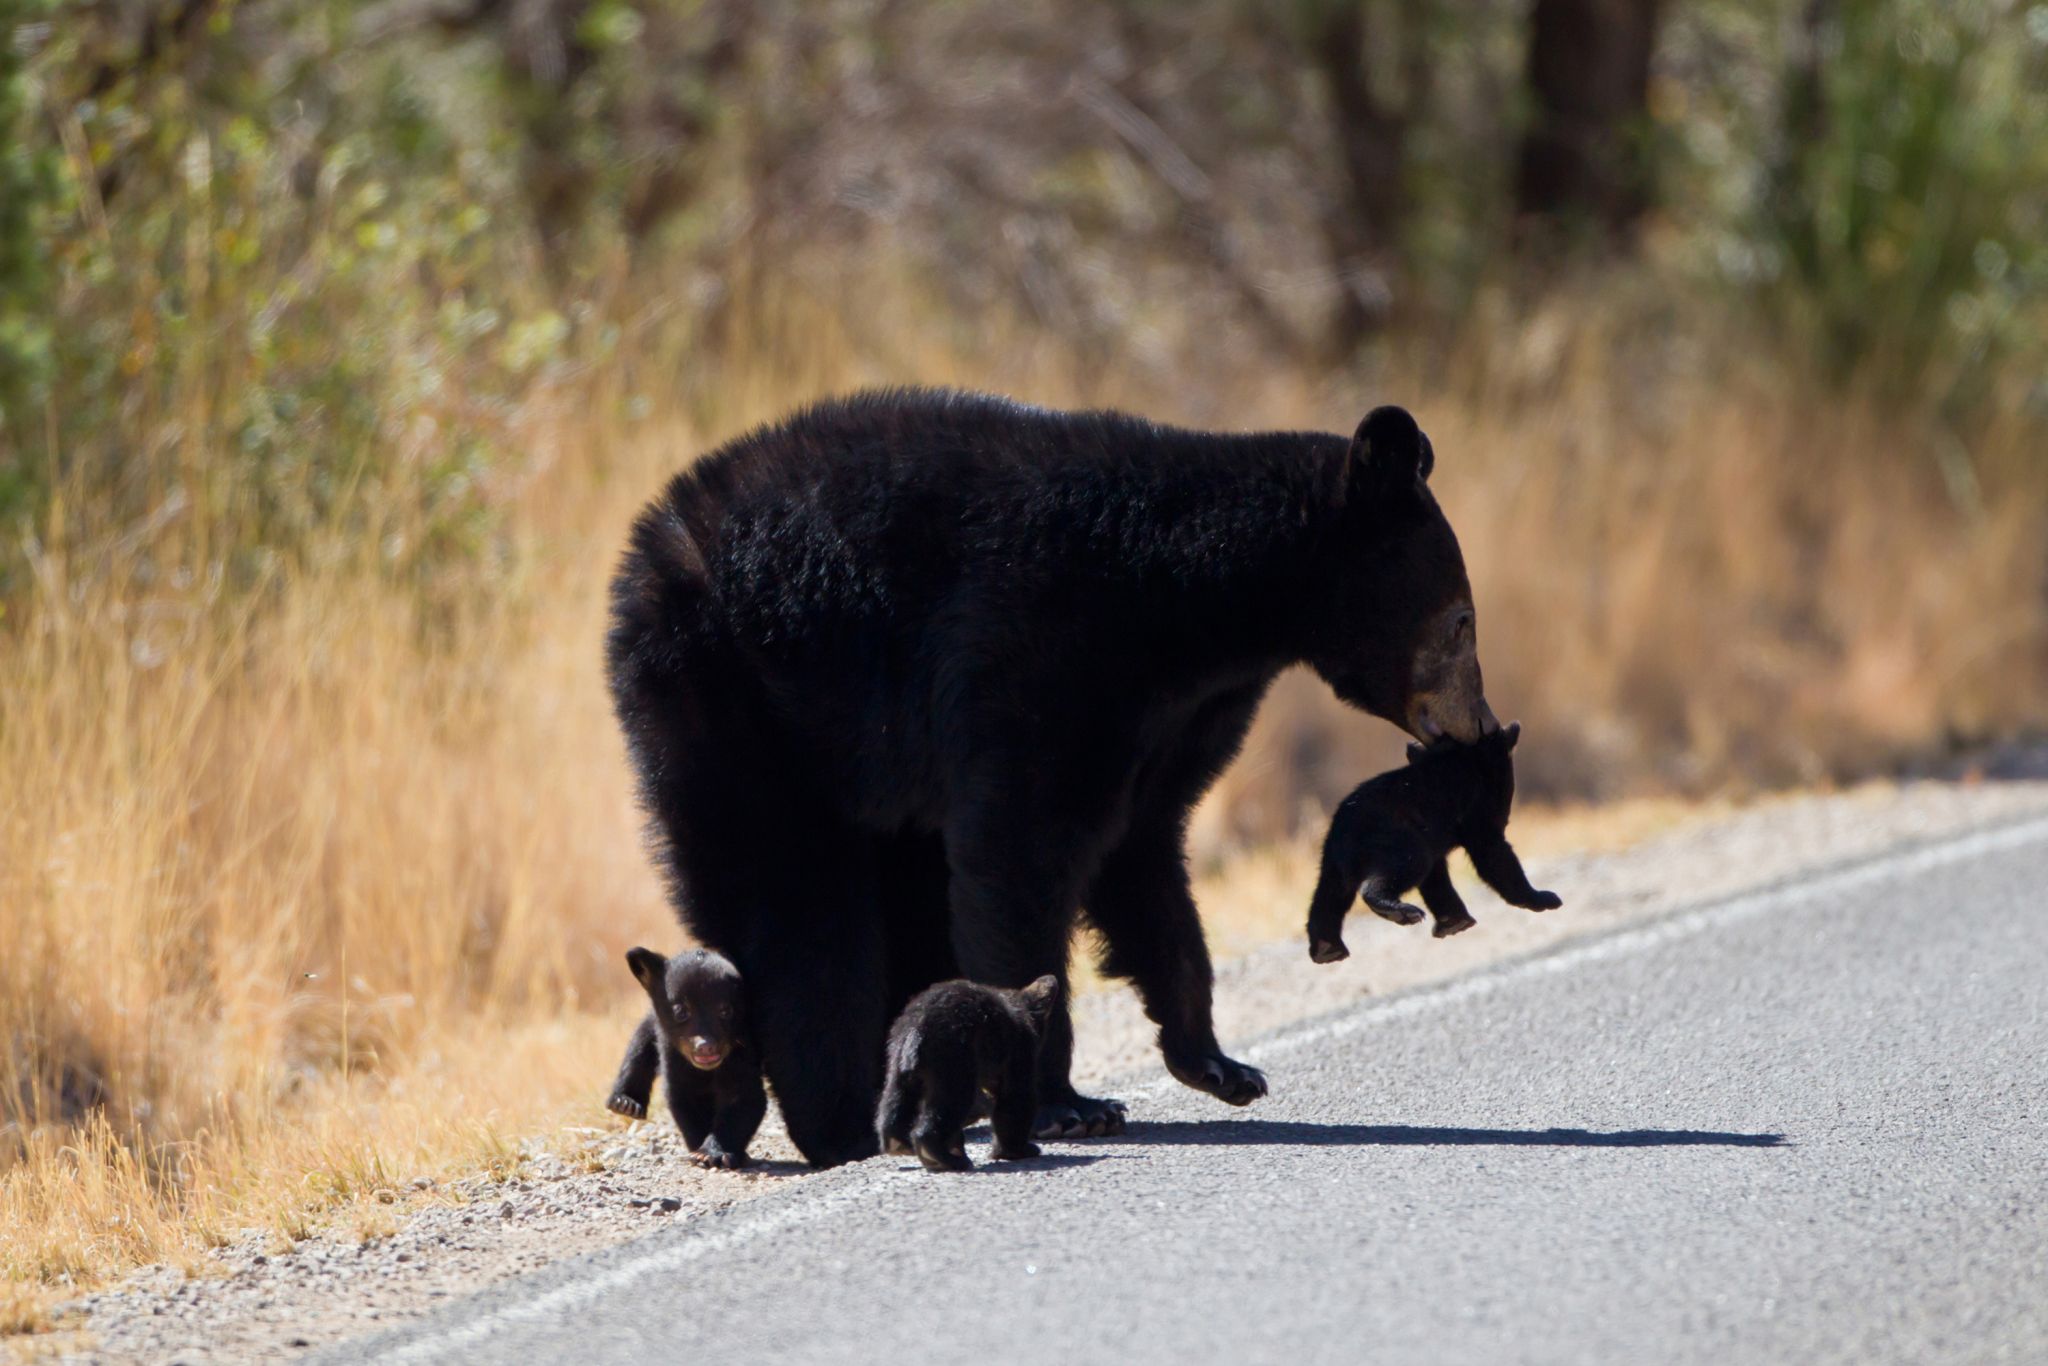 'Observe the posted speed limits': Bear cub at Big Bend National Park